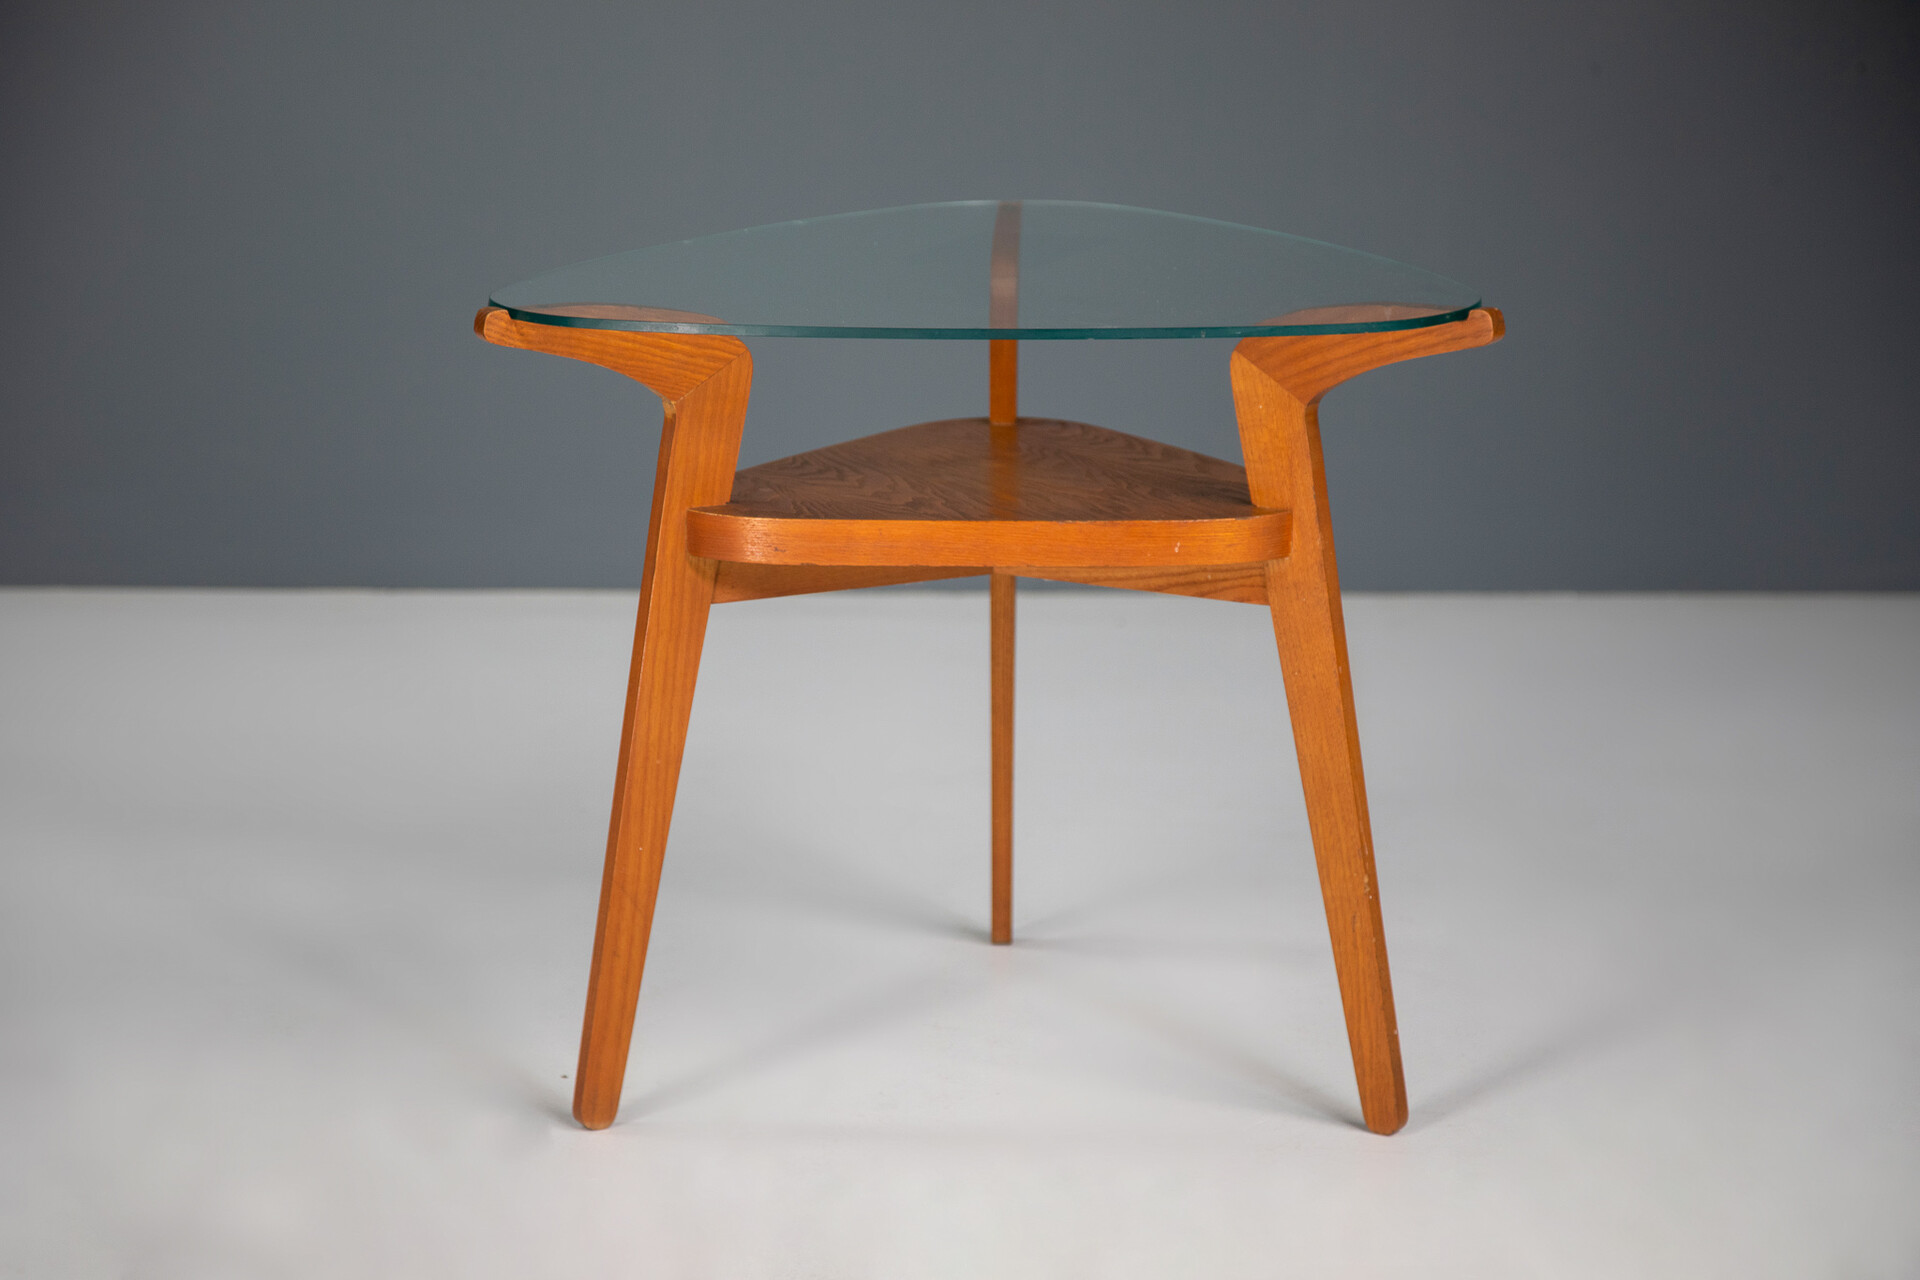 Mid century modern Wood and glass side / coffee table , France 1950s Mid-20th century